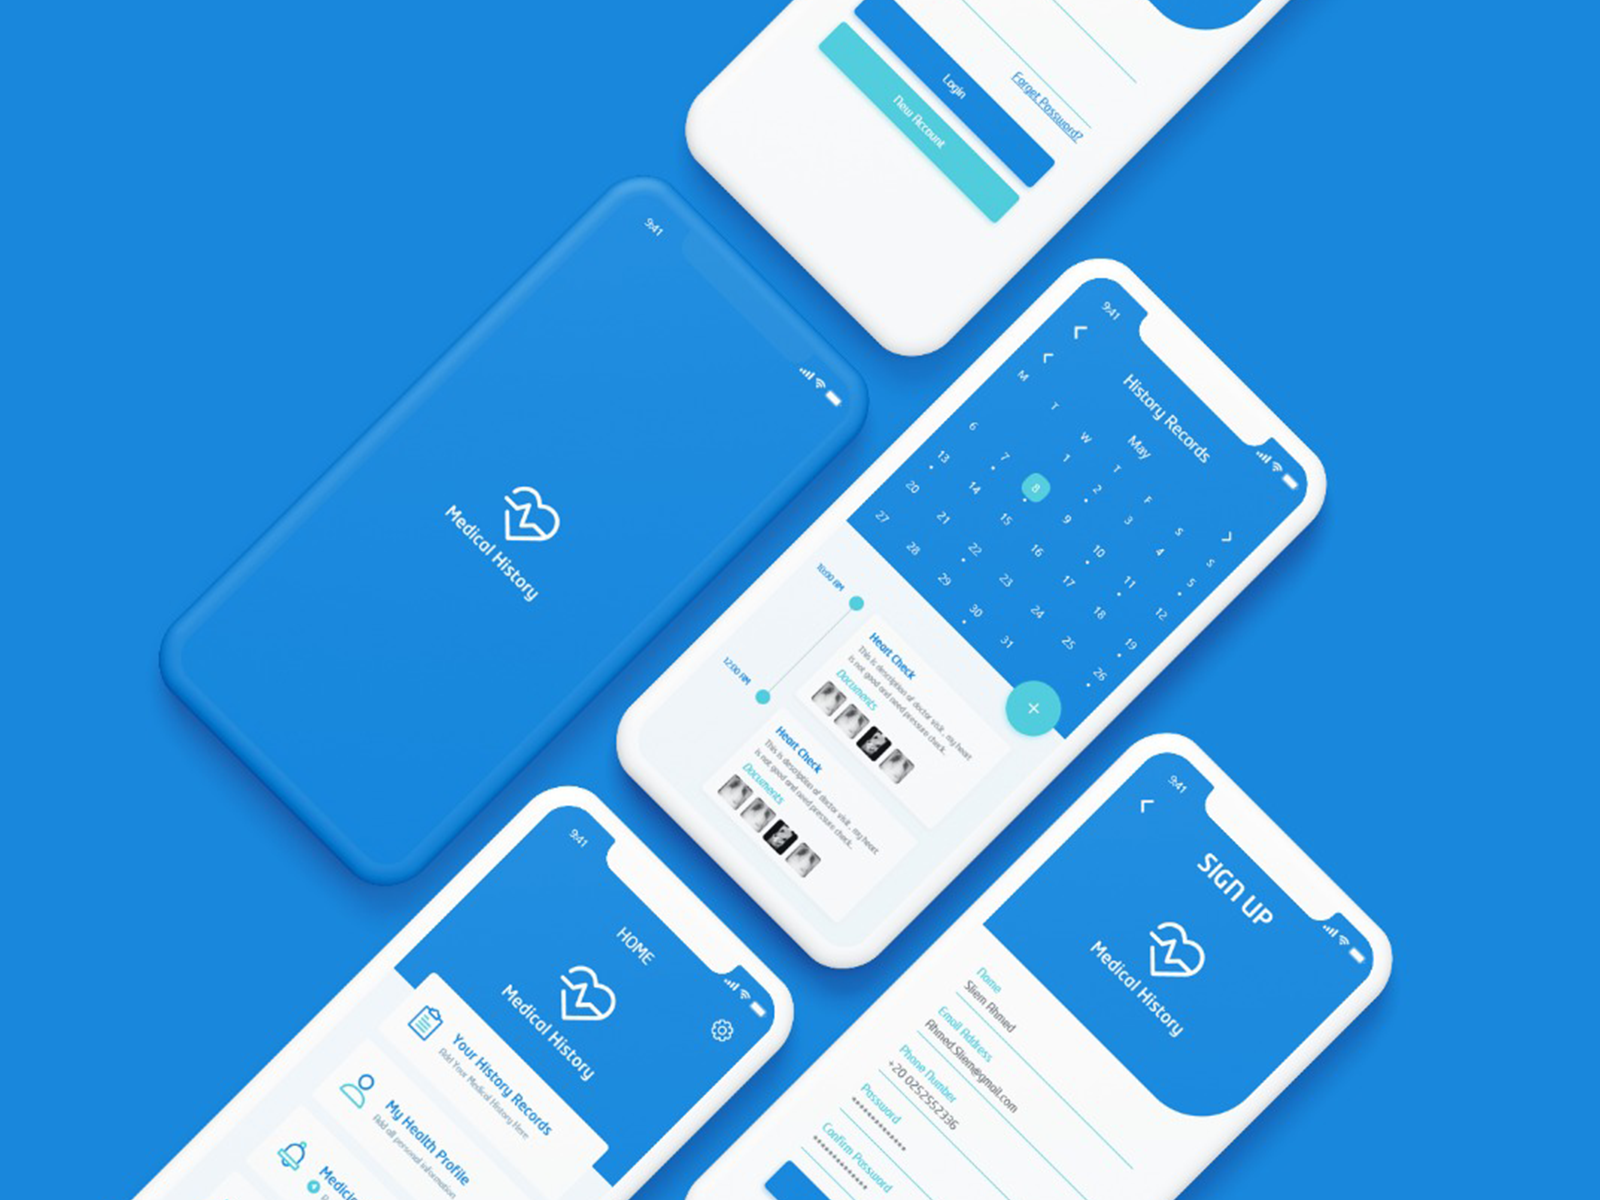 medical history App by Ahmed Mokhtar on Dribbble